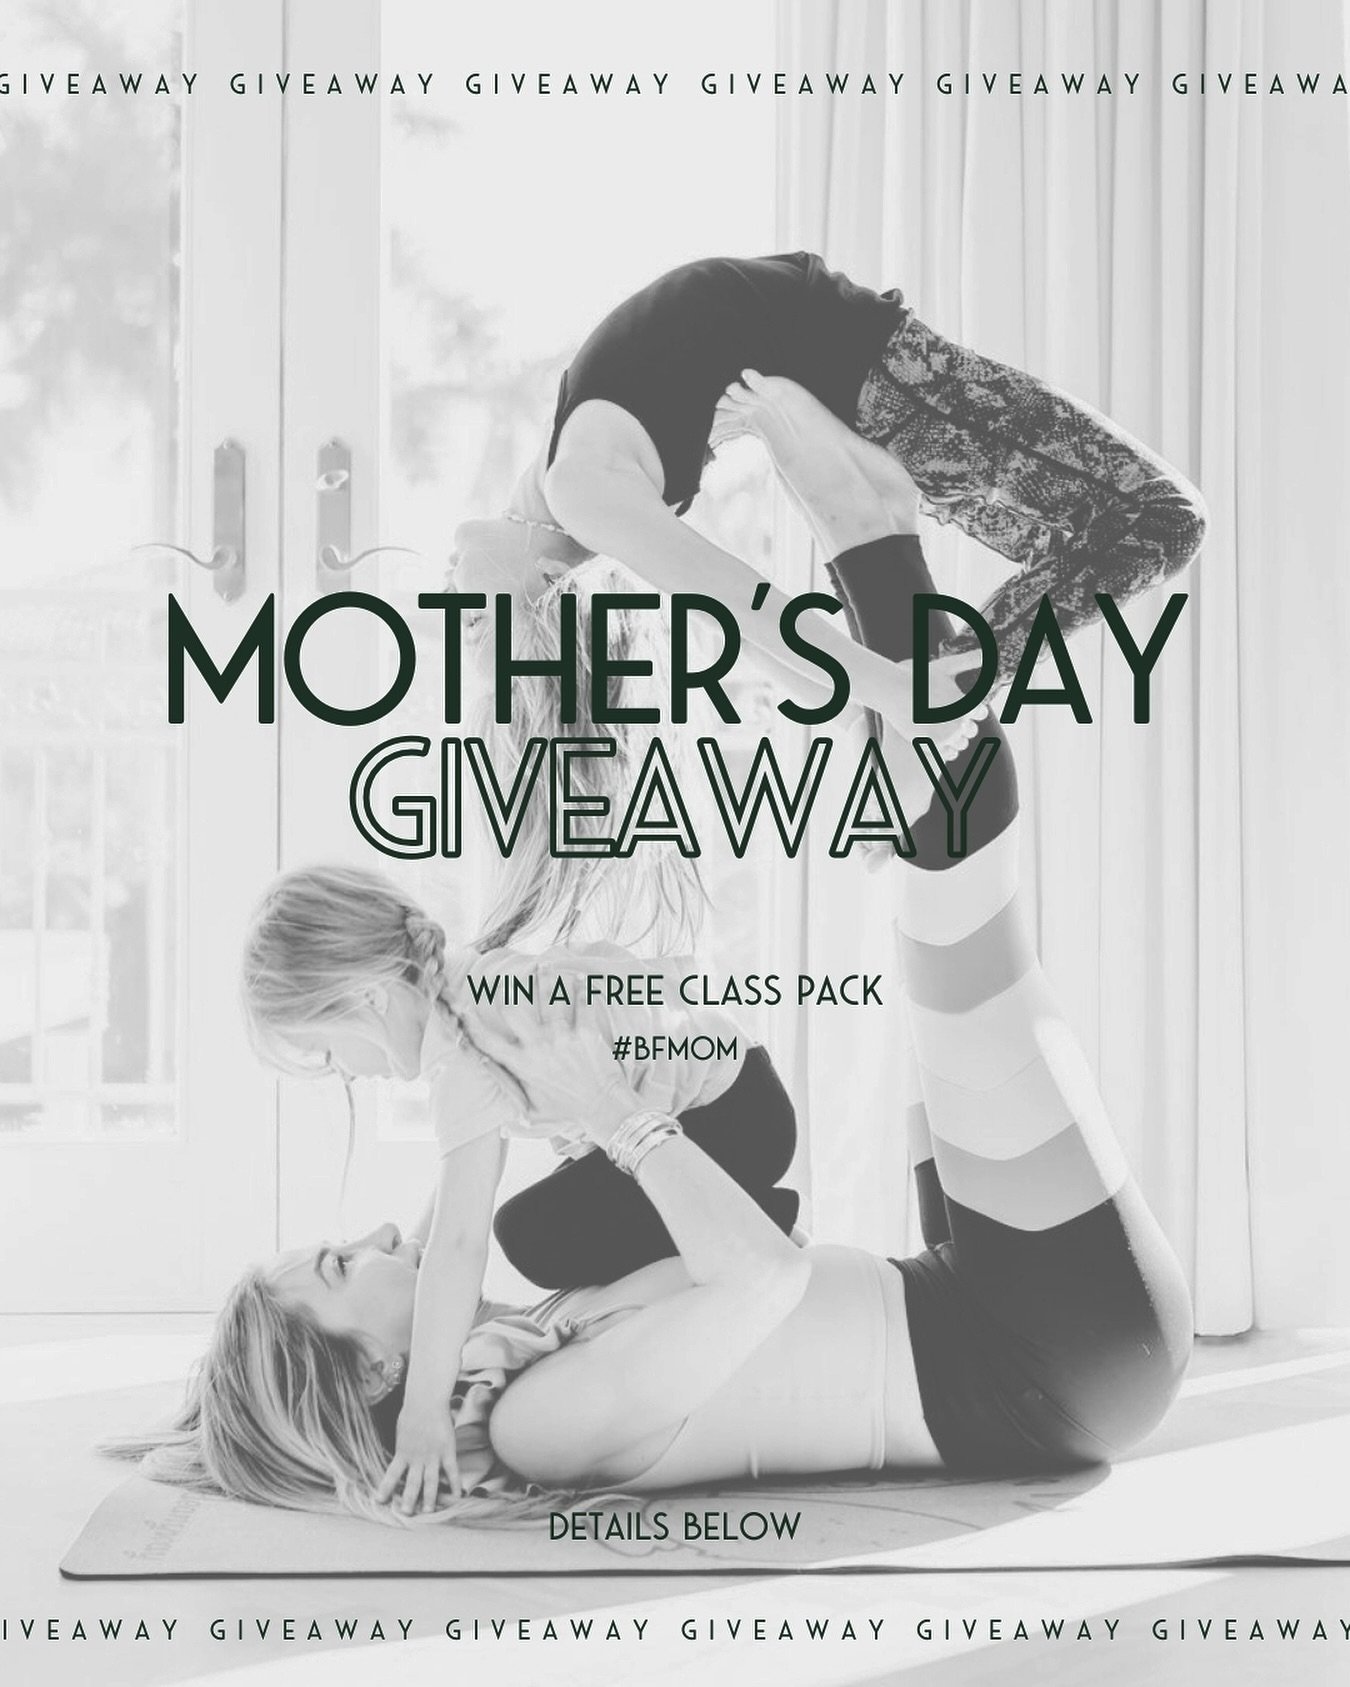 🌸 Mother&rsquo;s Day Giveaway! 🌸 This Mother&rsquo;s Day, we&rsquo;re celebrating all the incredible moms and mother figures out there with a special giveaway. Win a FREE class pass by sharing your love in a post or story! 🎁

How to Enter:
1. Post